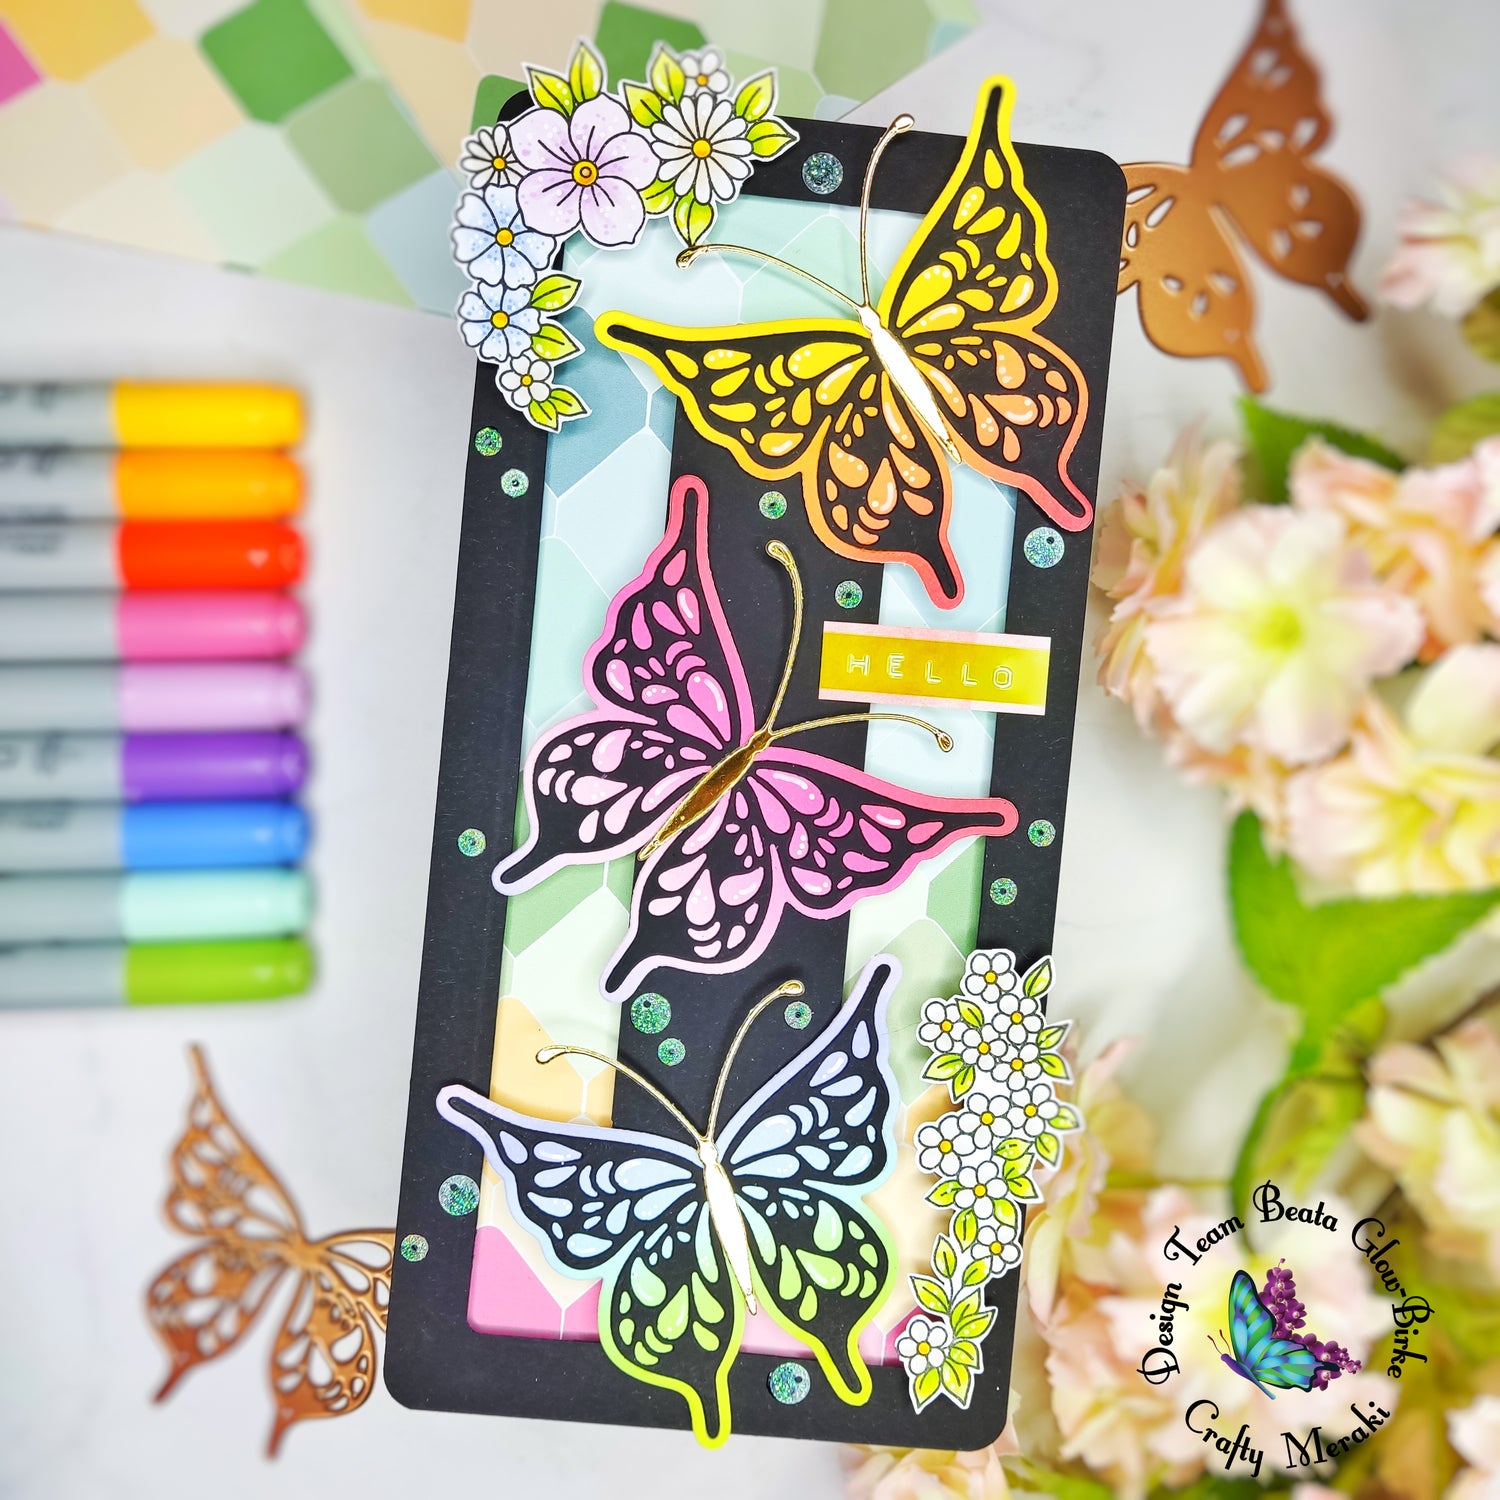 Rainbow butterflies - how to combine die-cuts and stamps by Beata